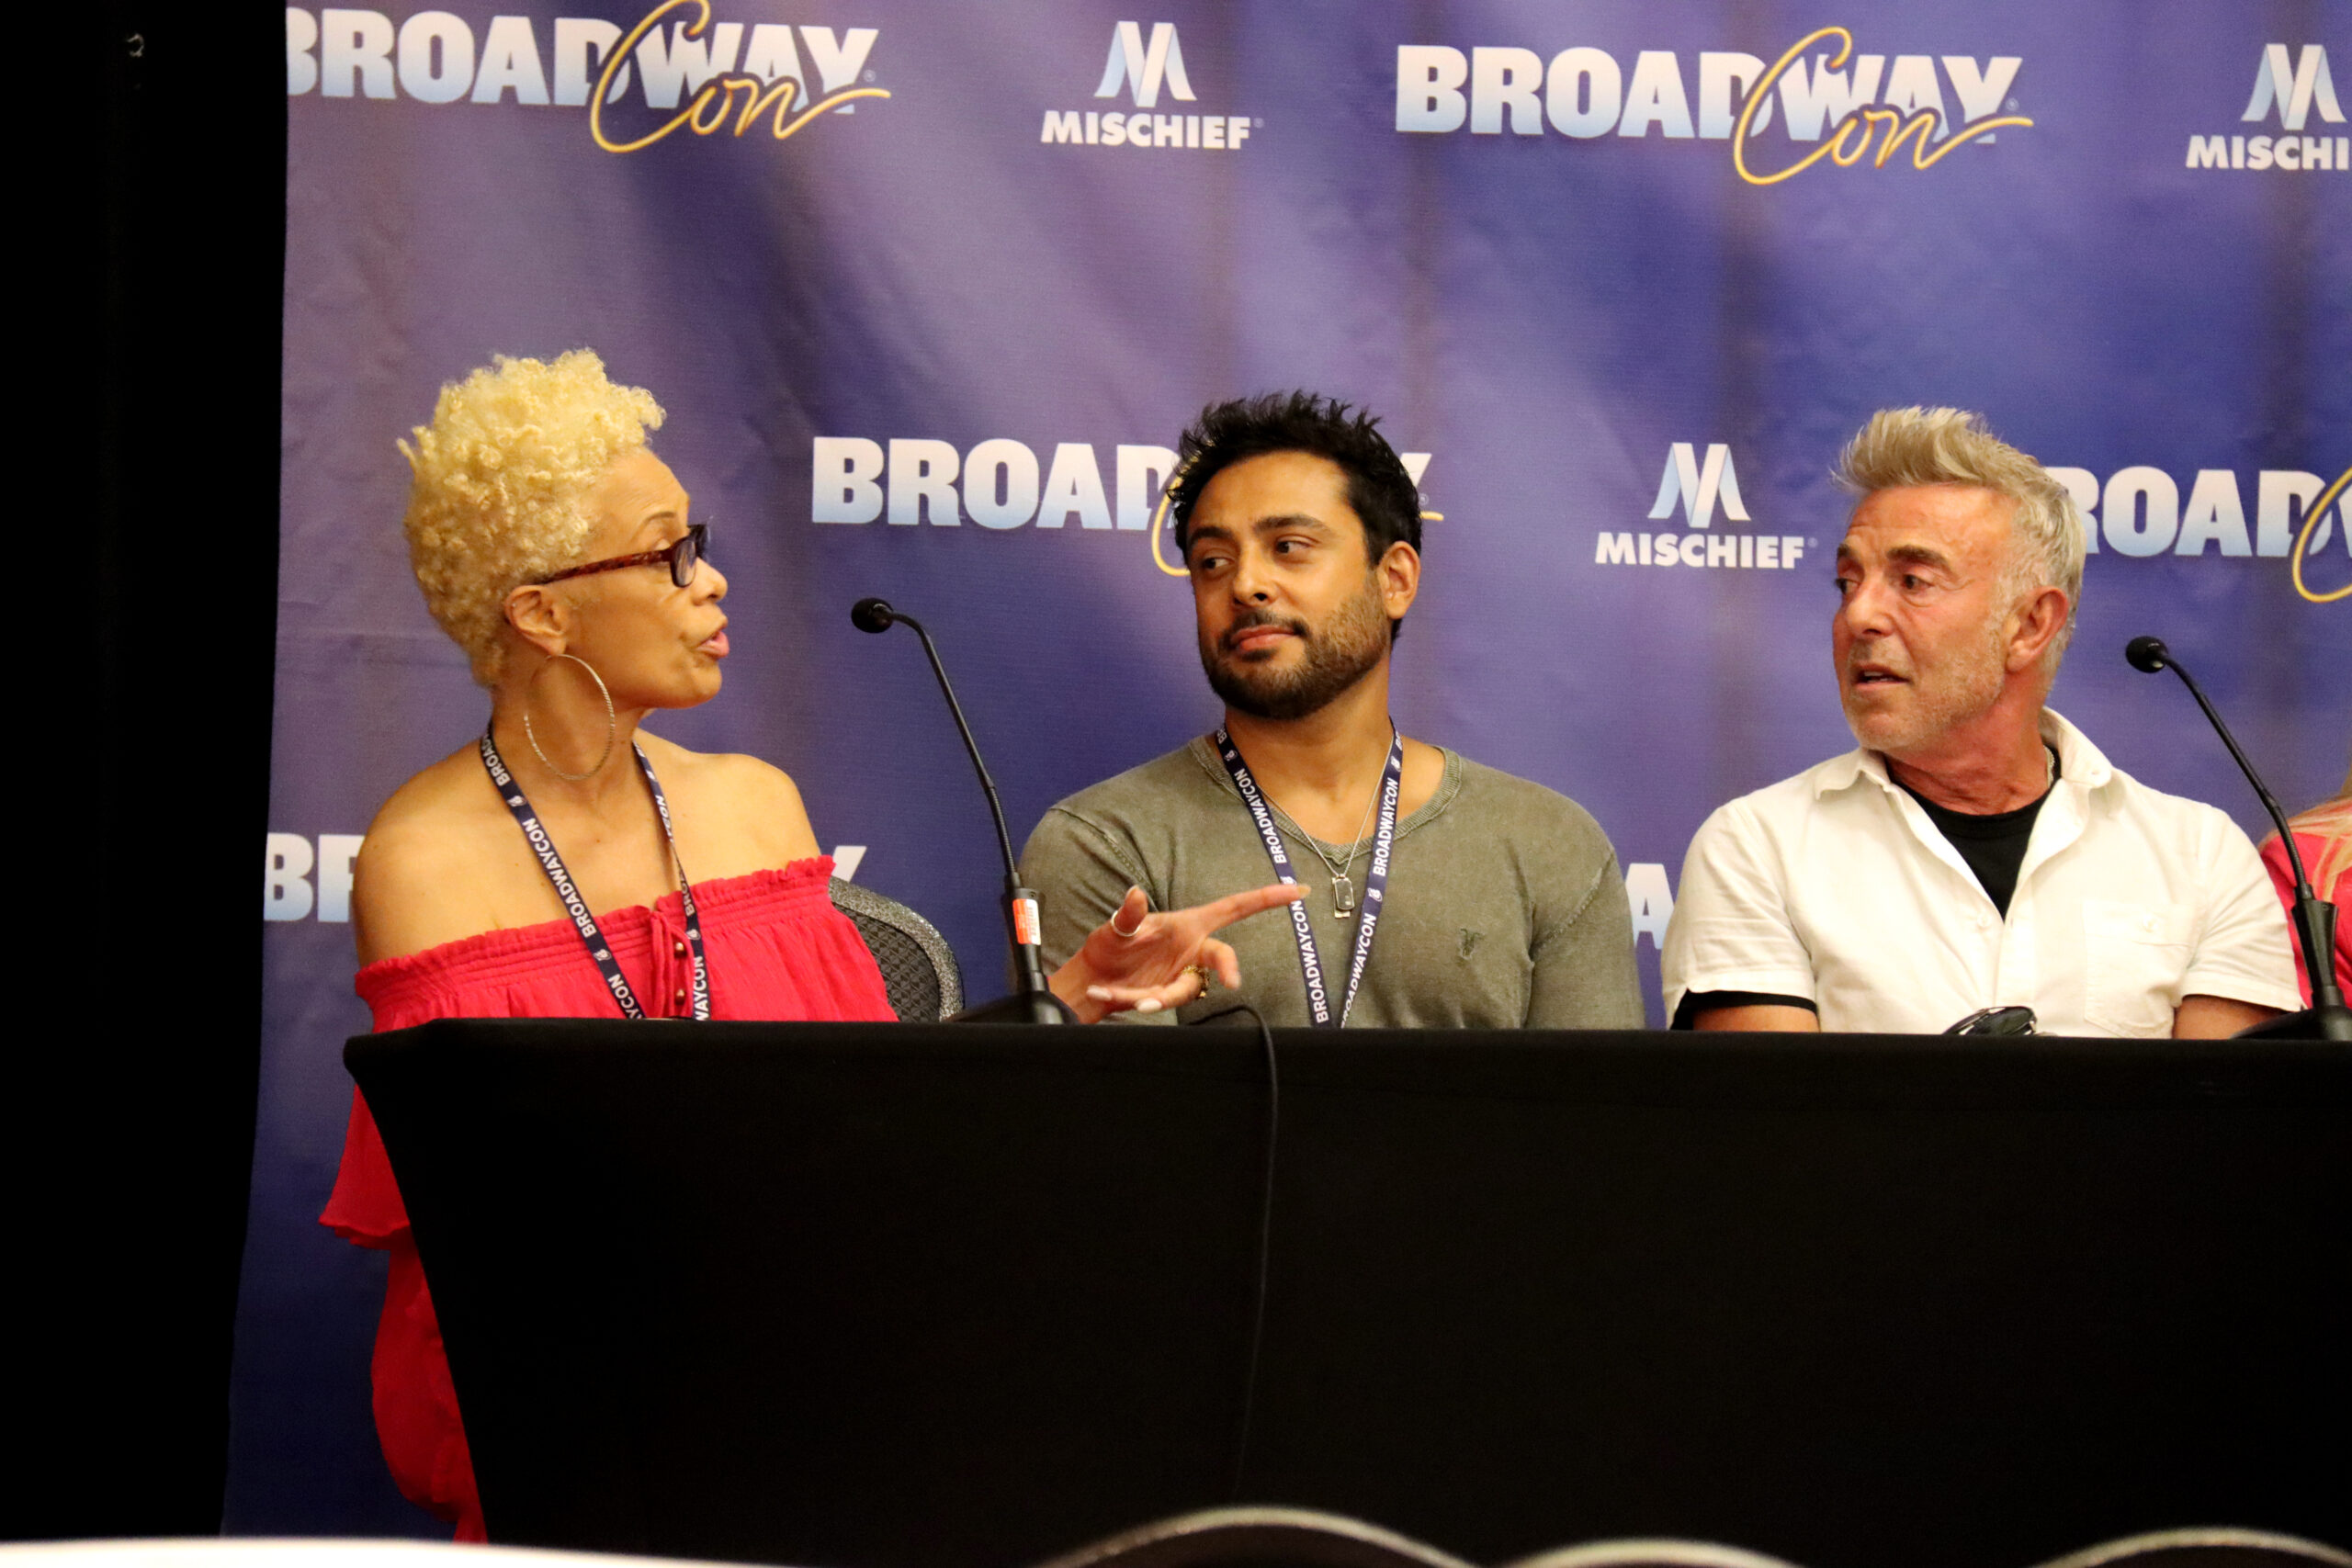 Valarie Pettiford, Manuel Herrera, and Wayne Cilento discussing Bob Fosse's legacy during BroadwayCon panel. Photo by Iris Chan for Broadway Direct.